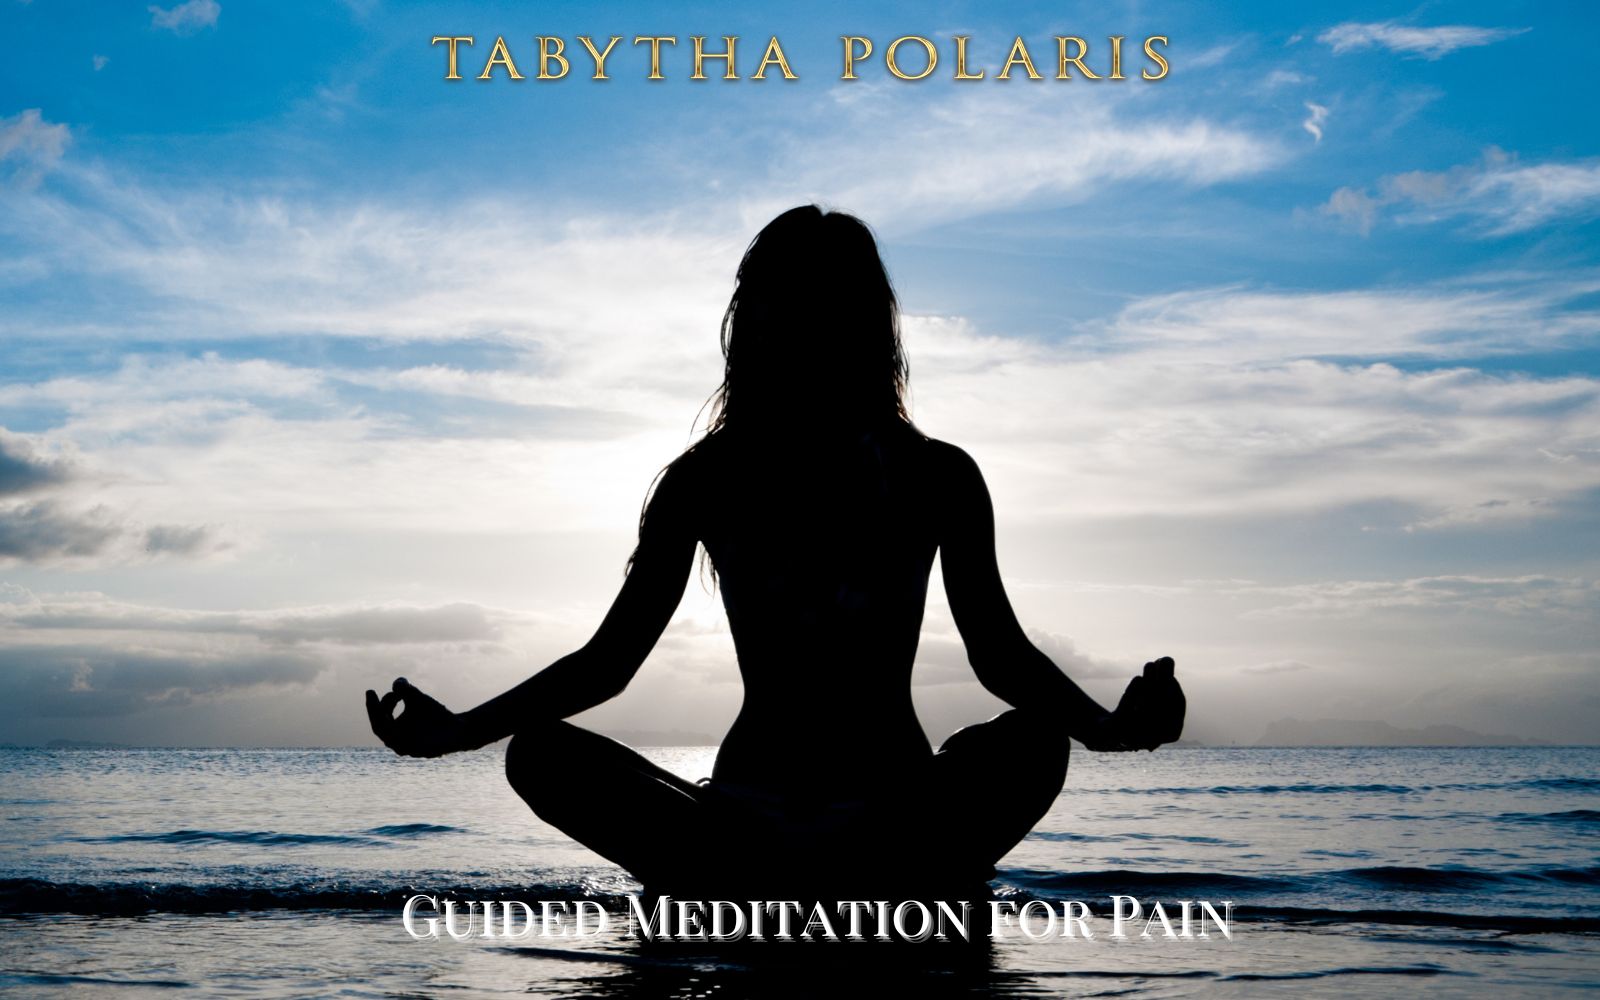 Guided Meditation for Physical Pain